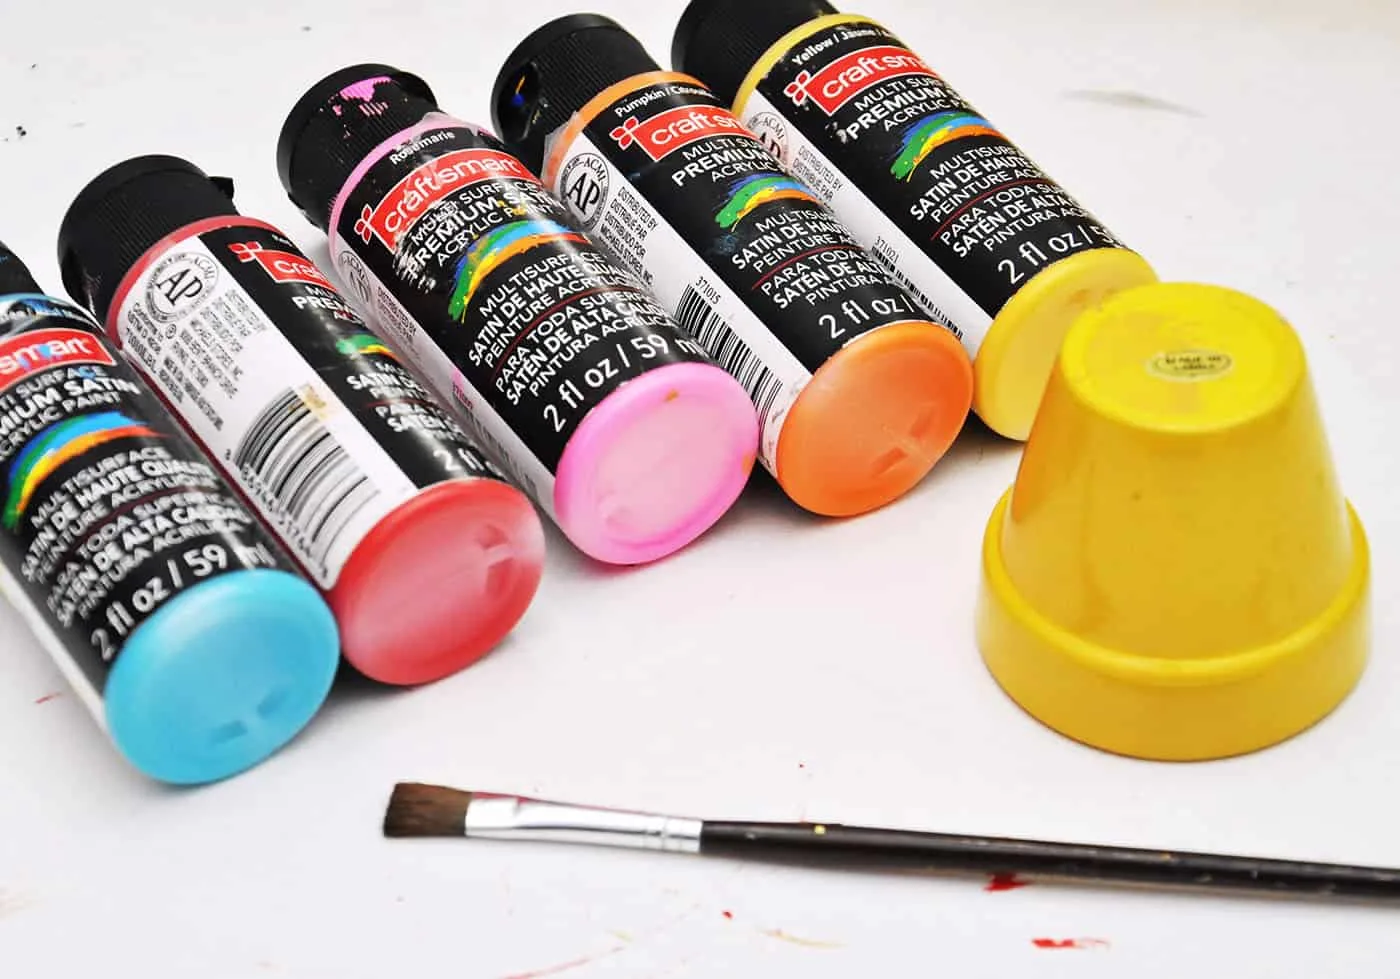 Various colors of craftsmart paint with a yellow painted flower pot